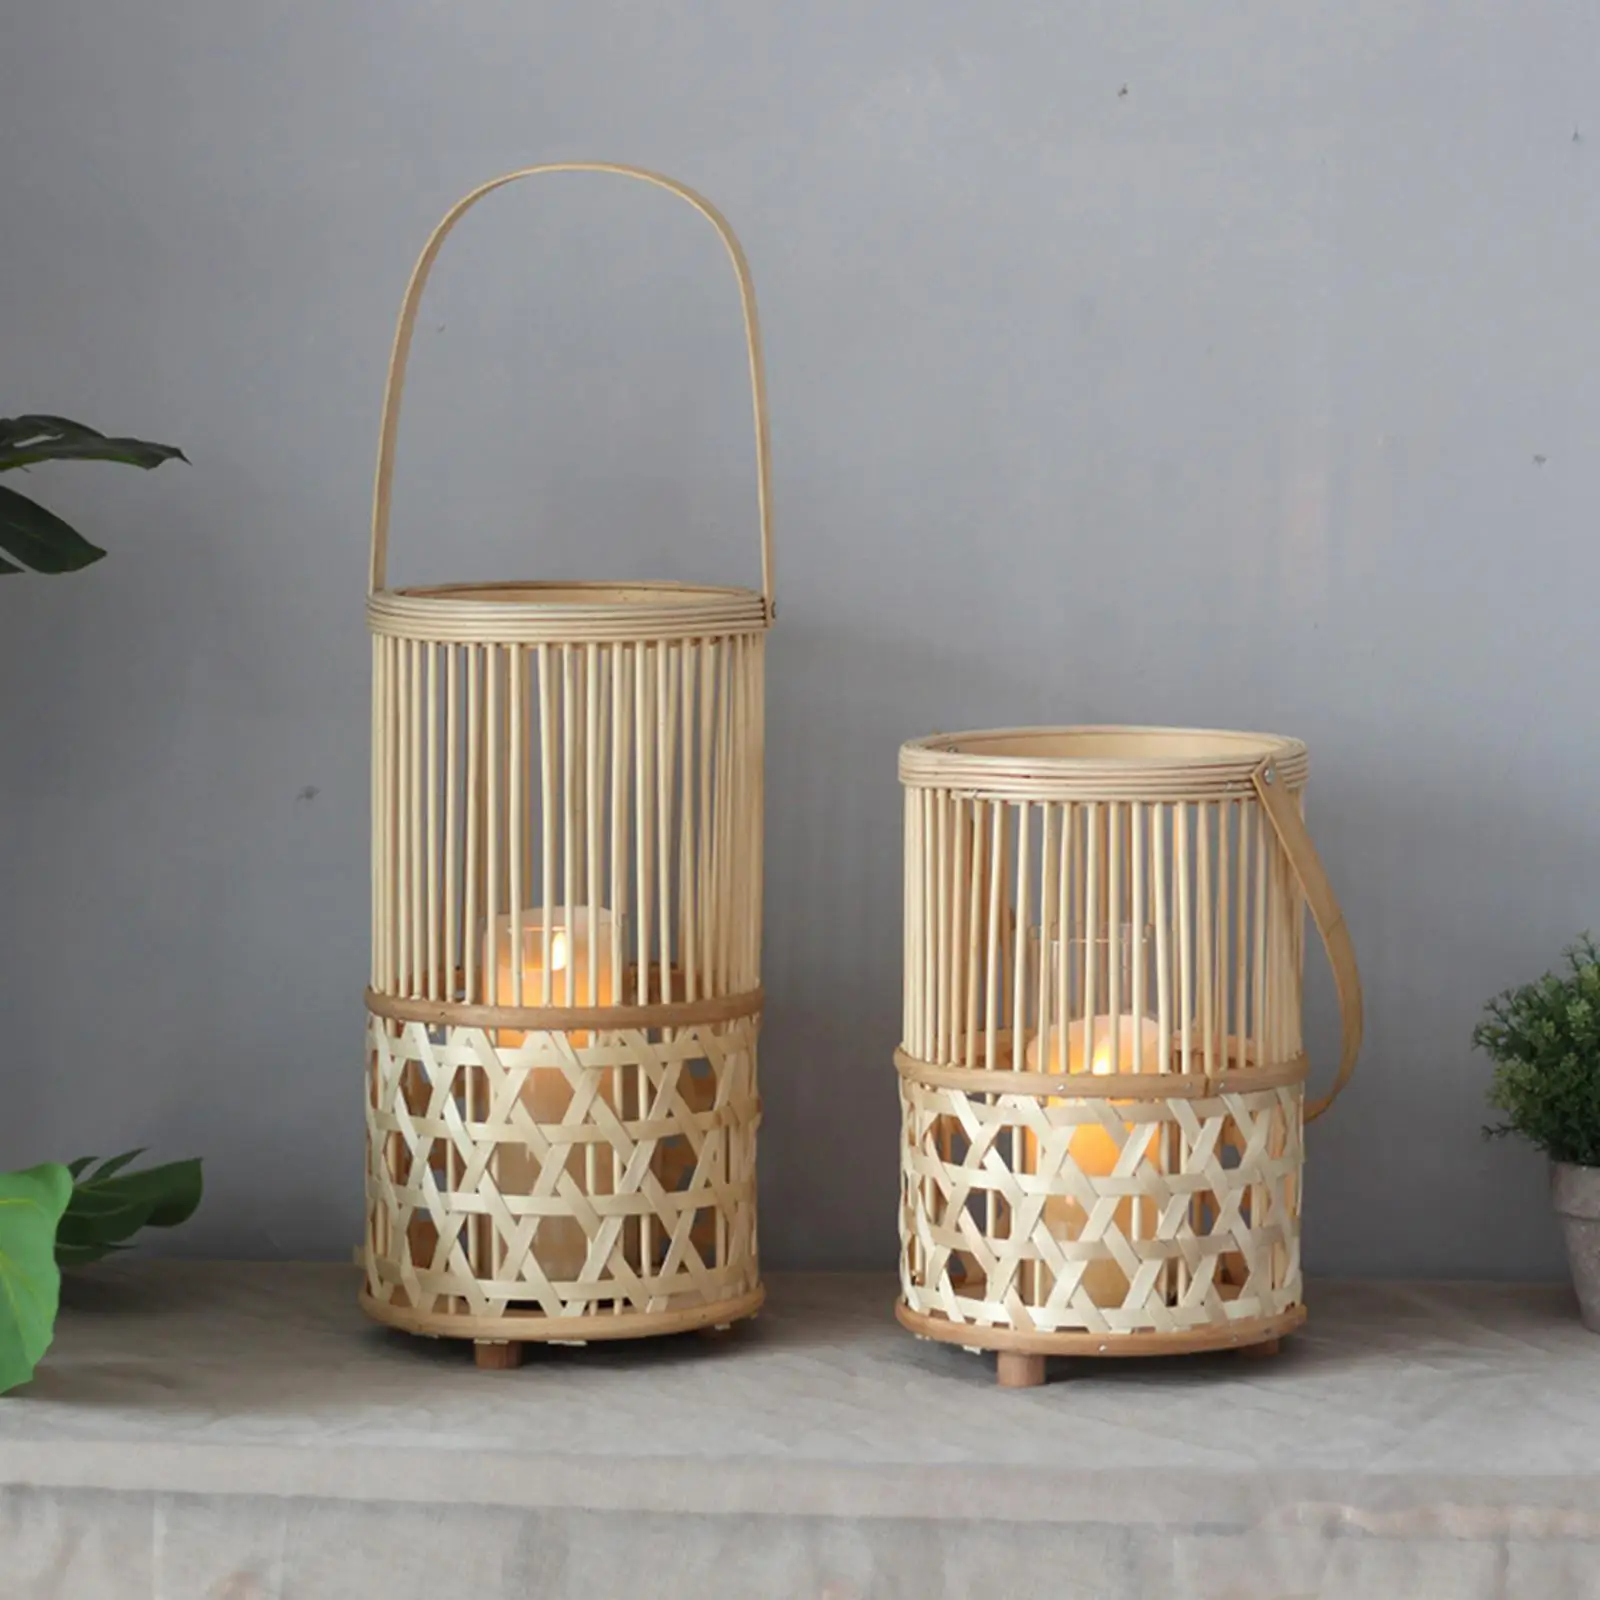 Retro Rattan Natural Lantern with Handle Decoration, Solid and Durable Tabletop Decor Lovely Home Collection Hollow Design Gift